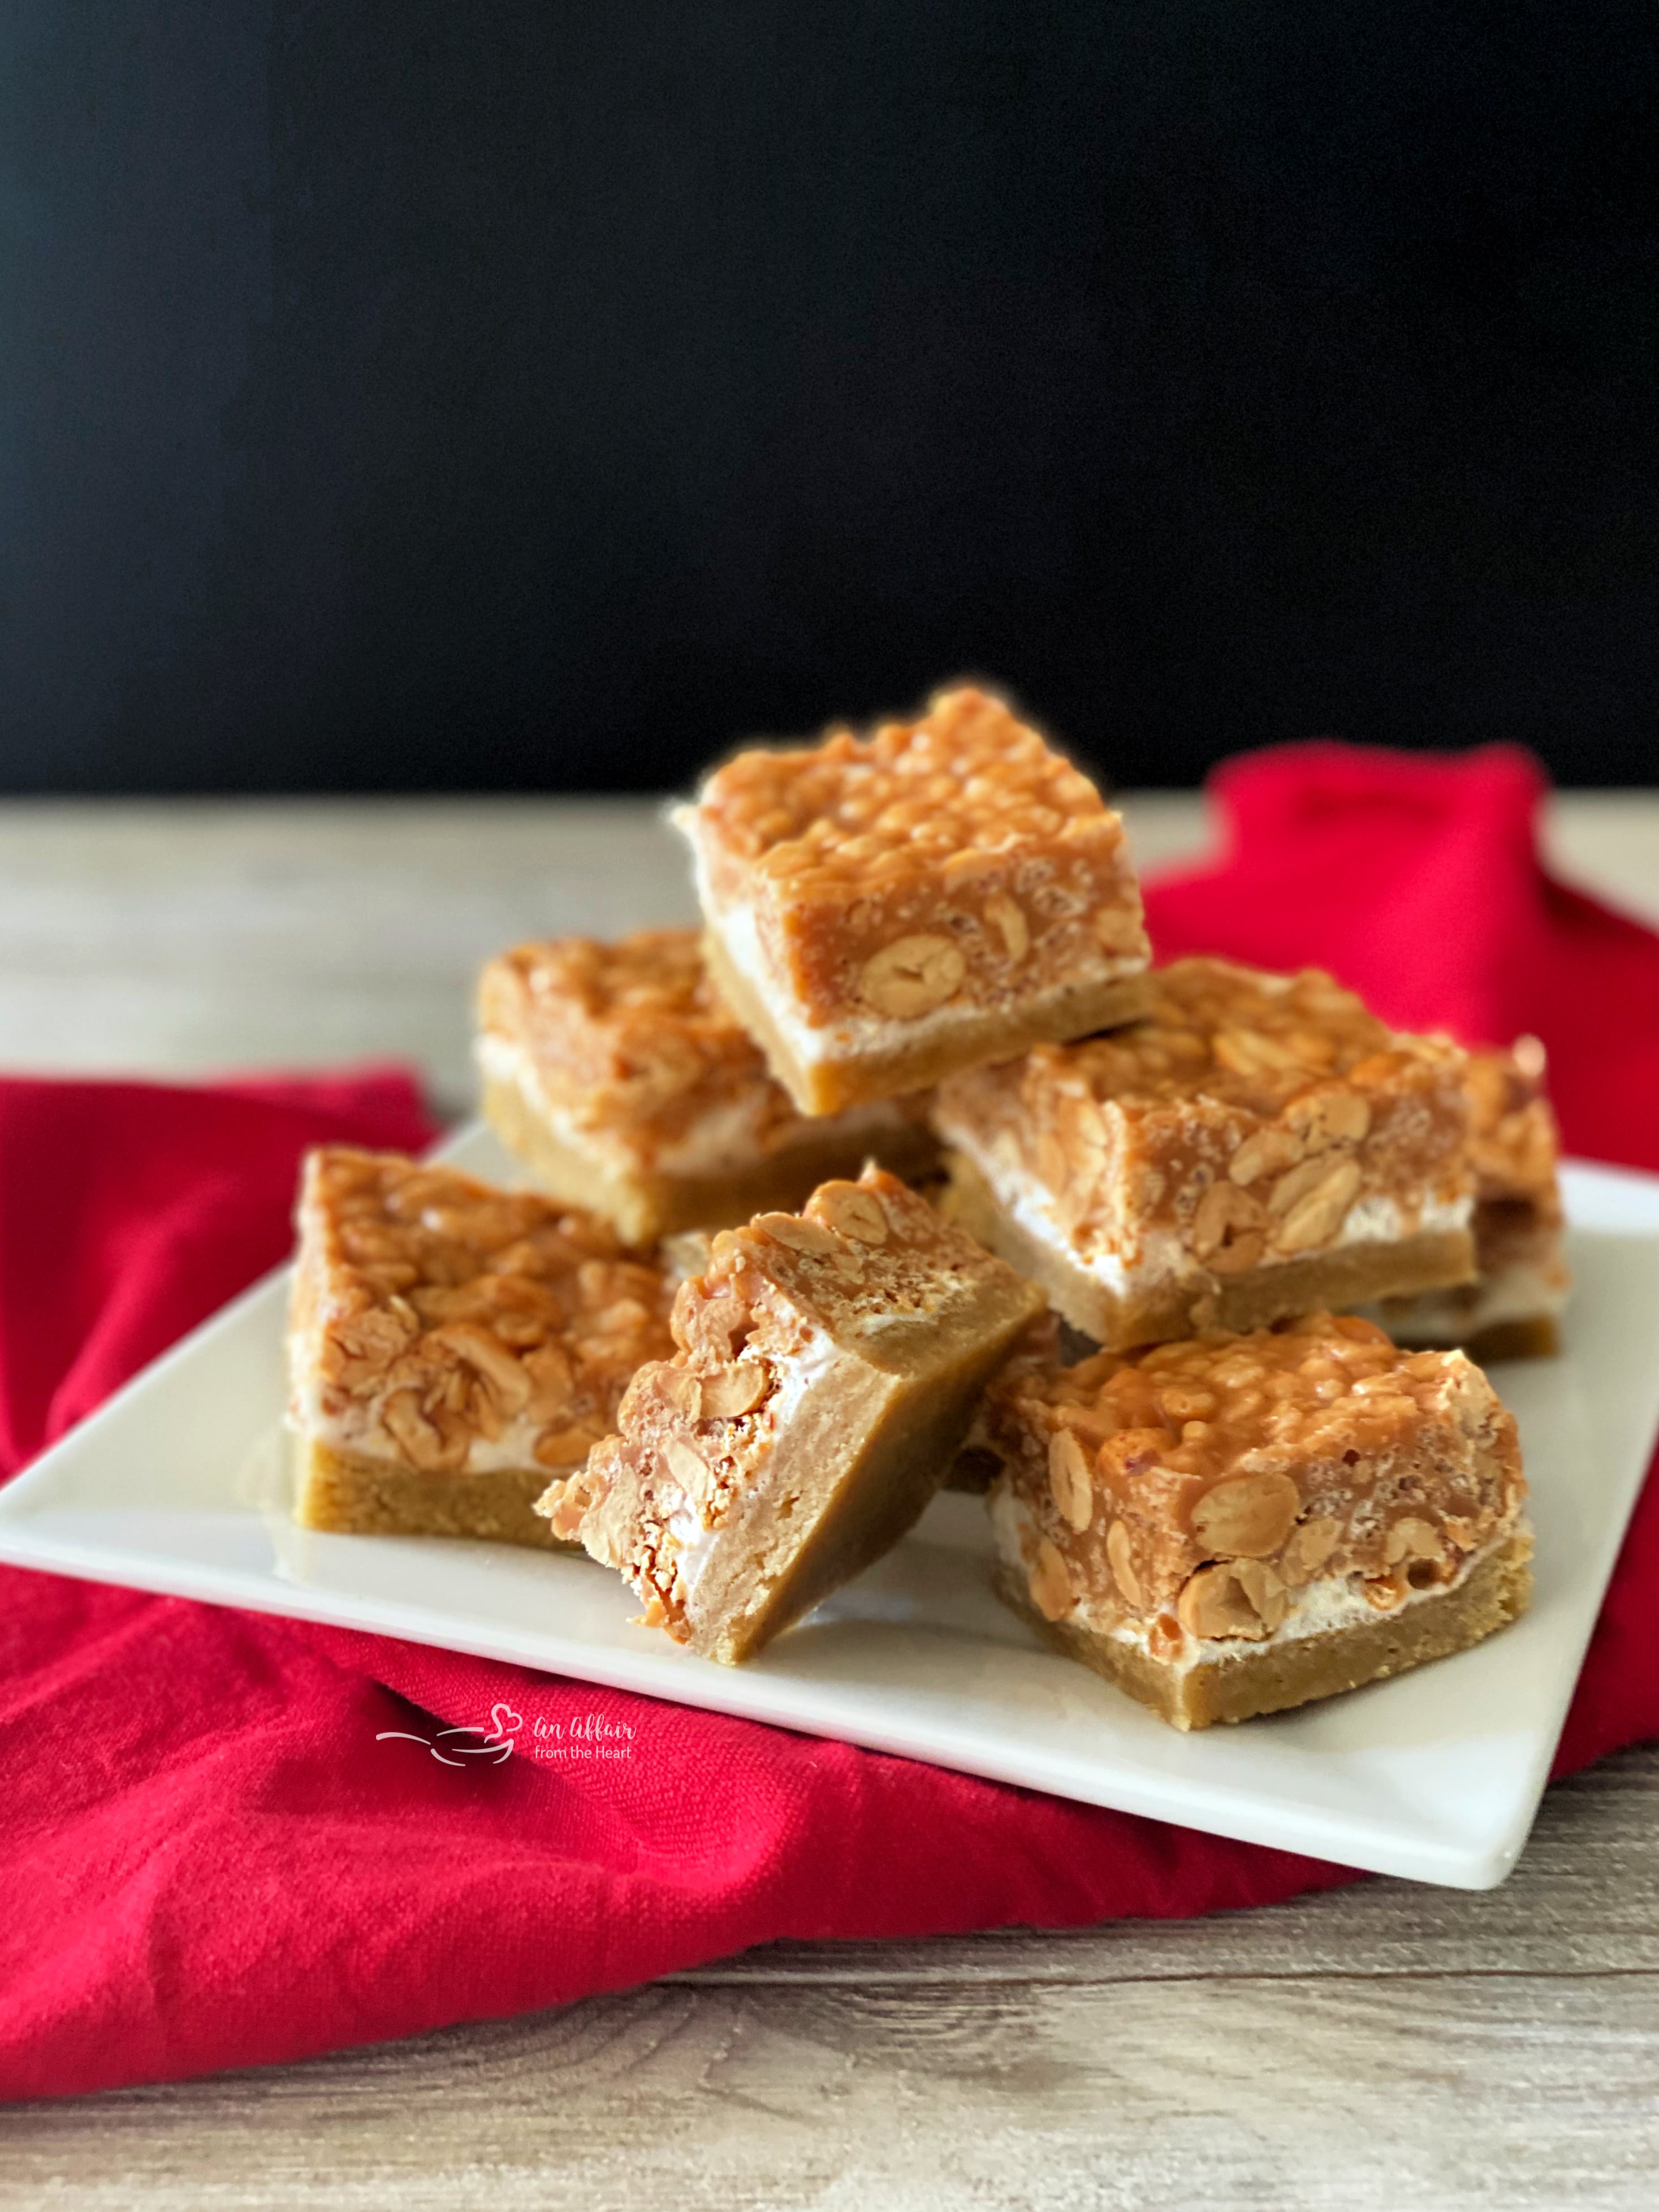 Salted Nut Roll Bars - A Candy Bar Copycat Recipe